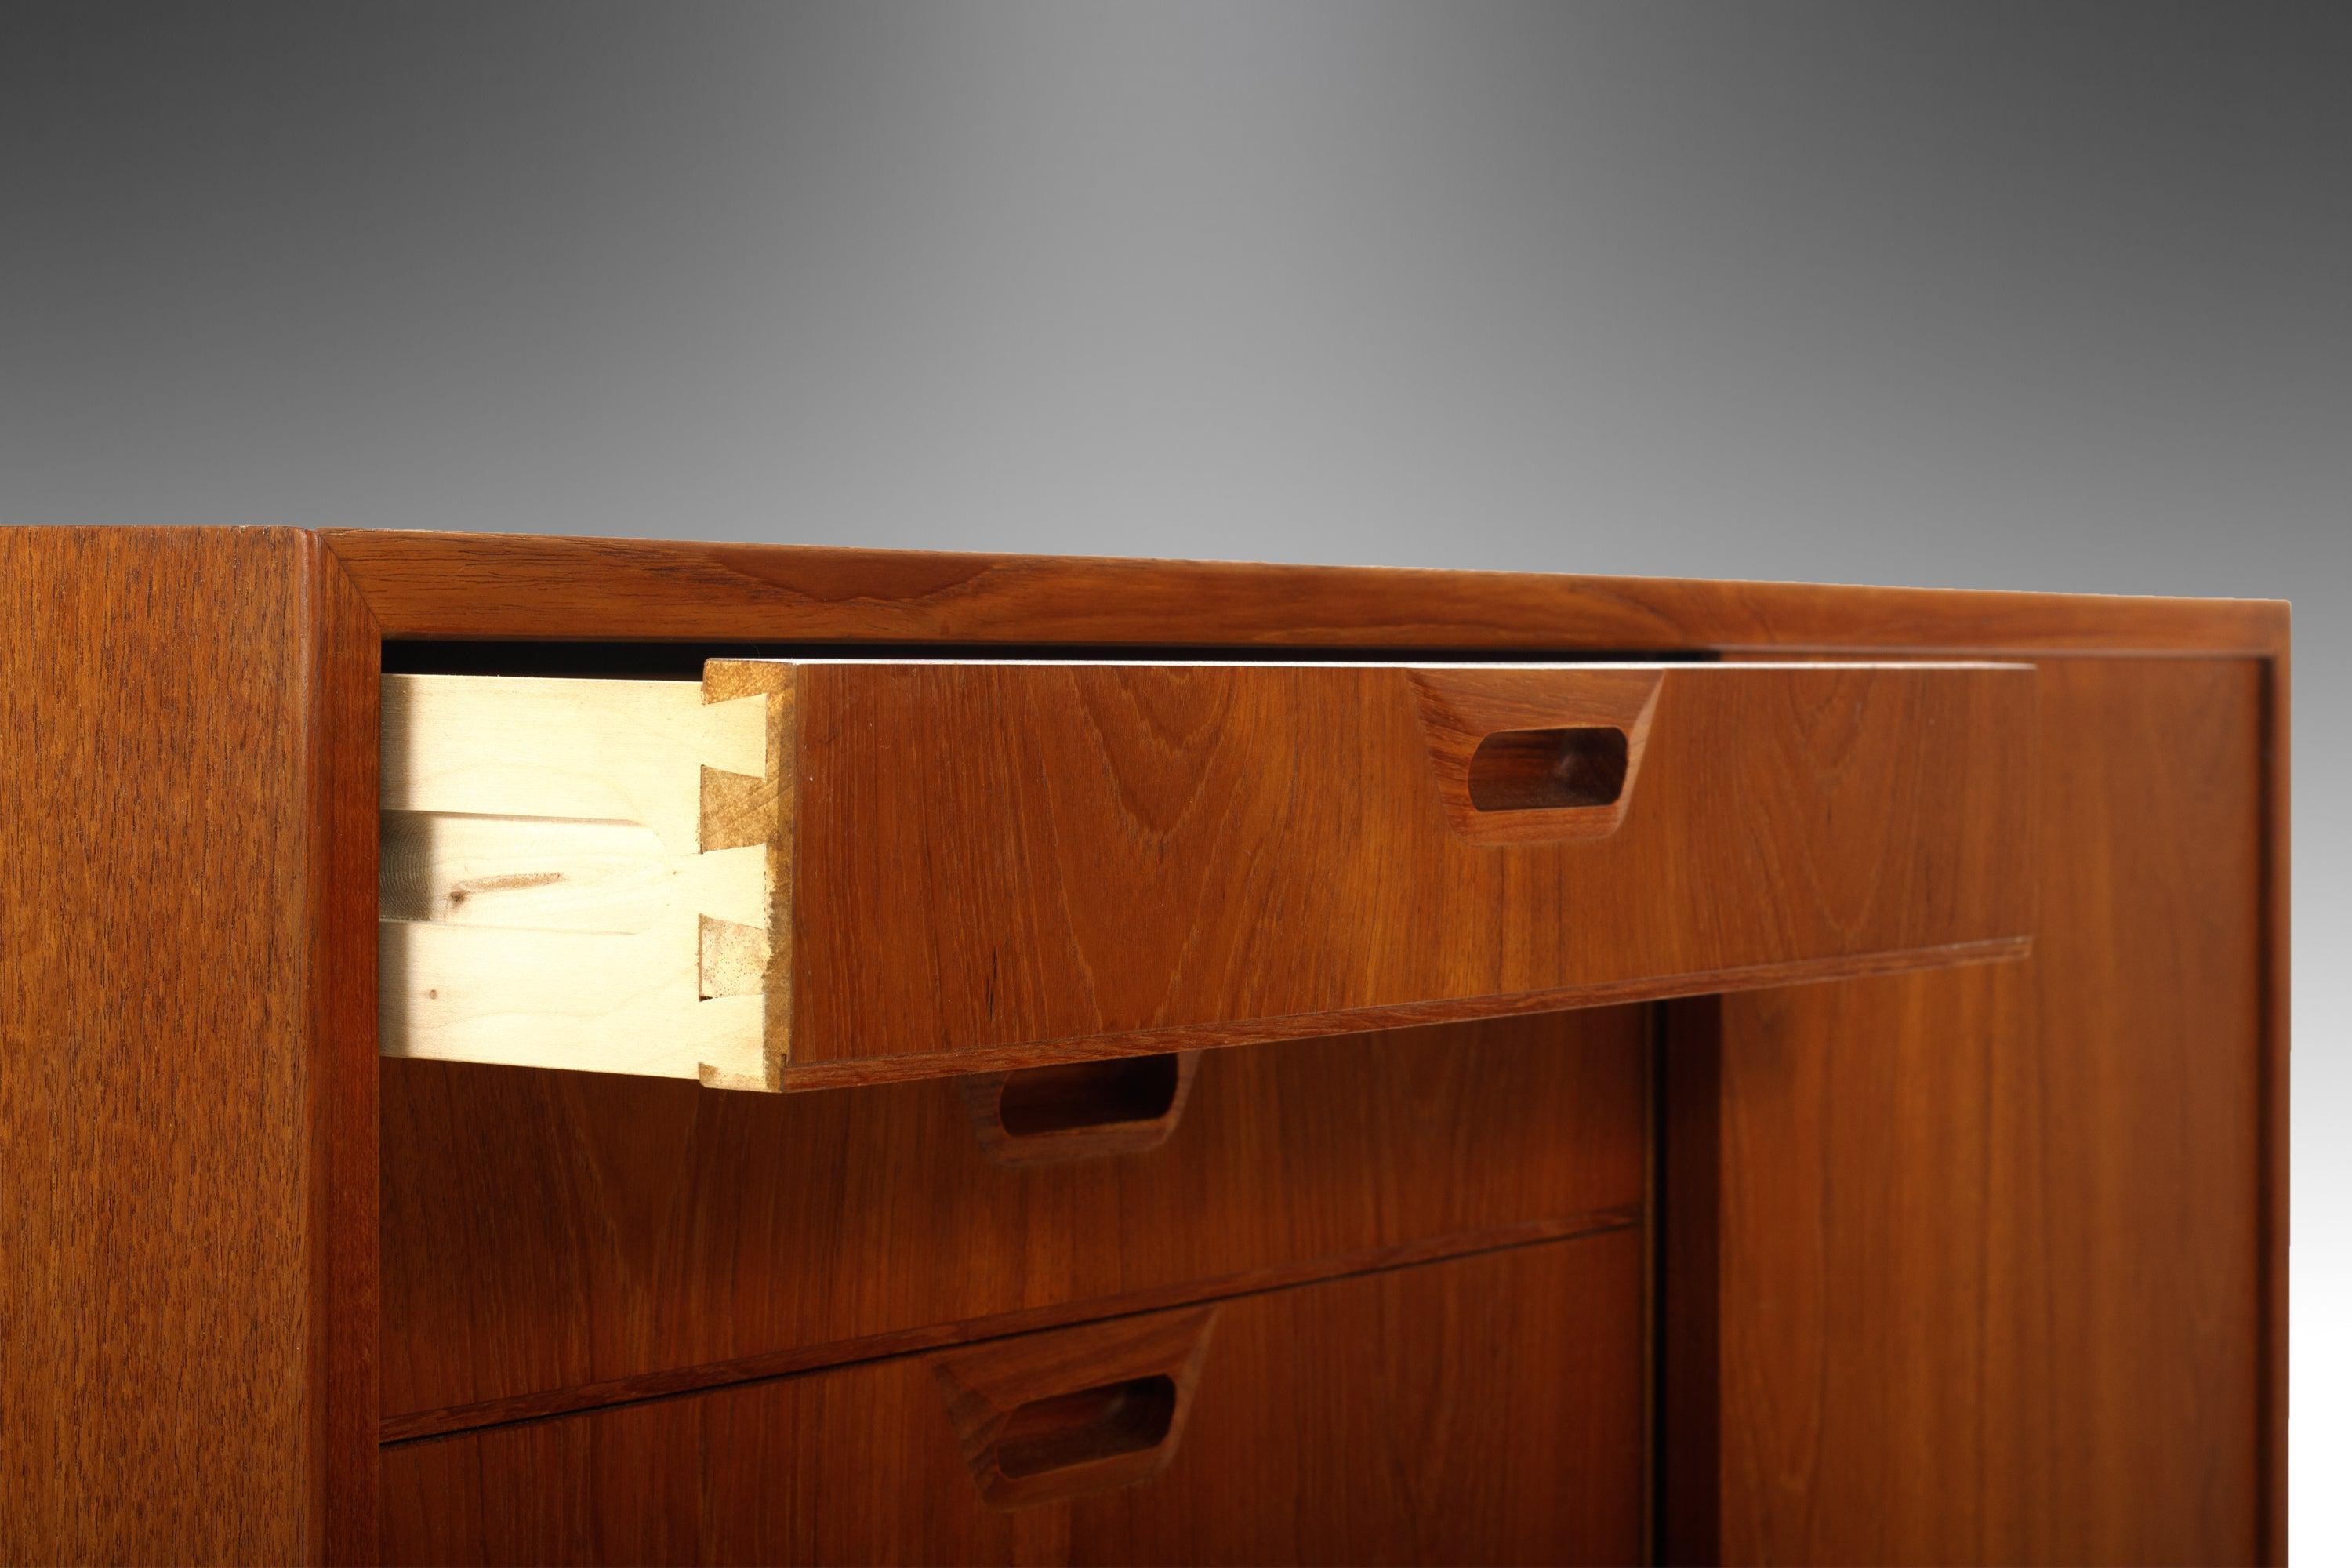 An exceptional Danish Modern cabinet constructed from teak was built with attention to all of the important details. The left facing side of the cabinet has 6 drawers (2 shallow & 4 deep). The right facing side of the cabinet is hidden by a sliding